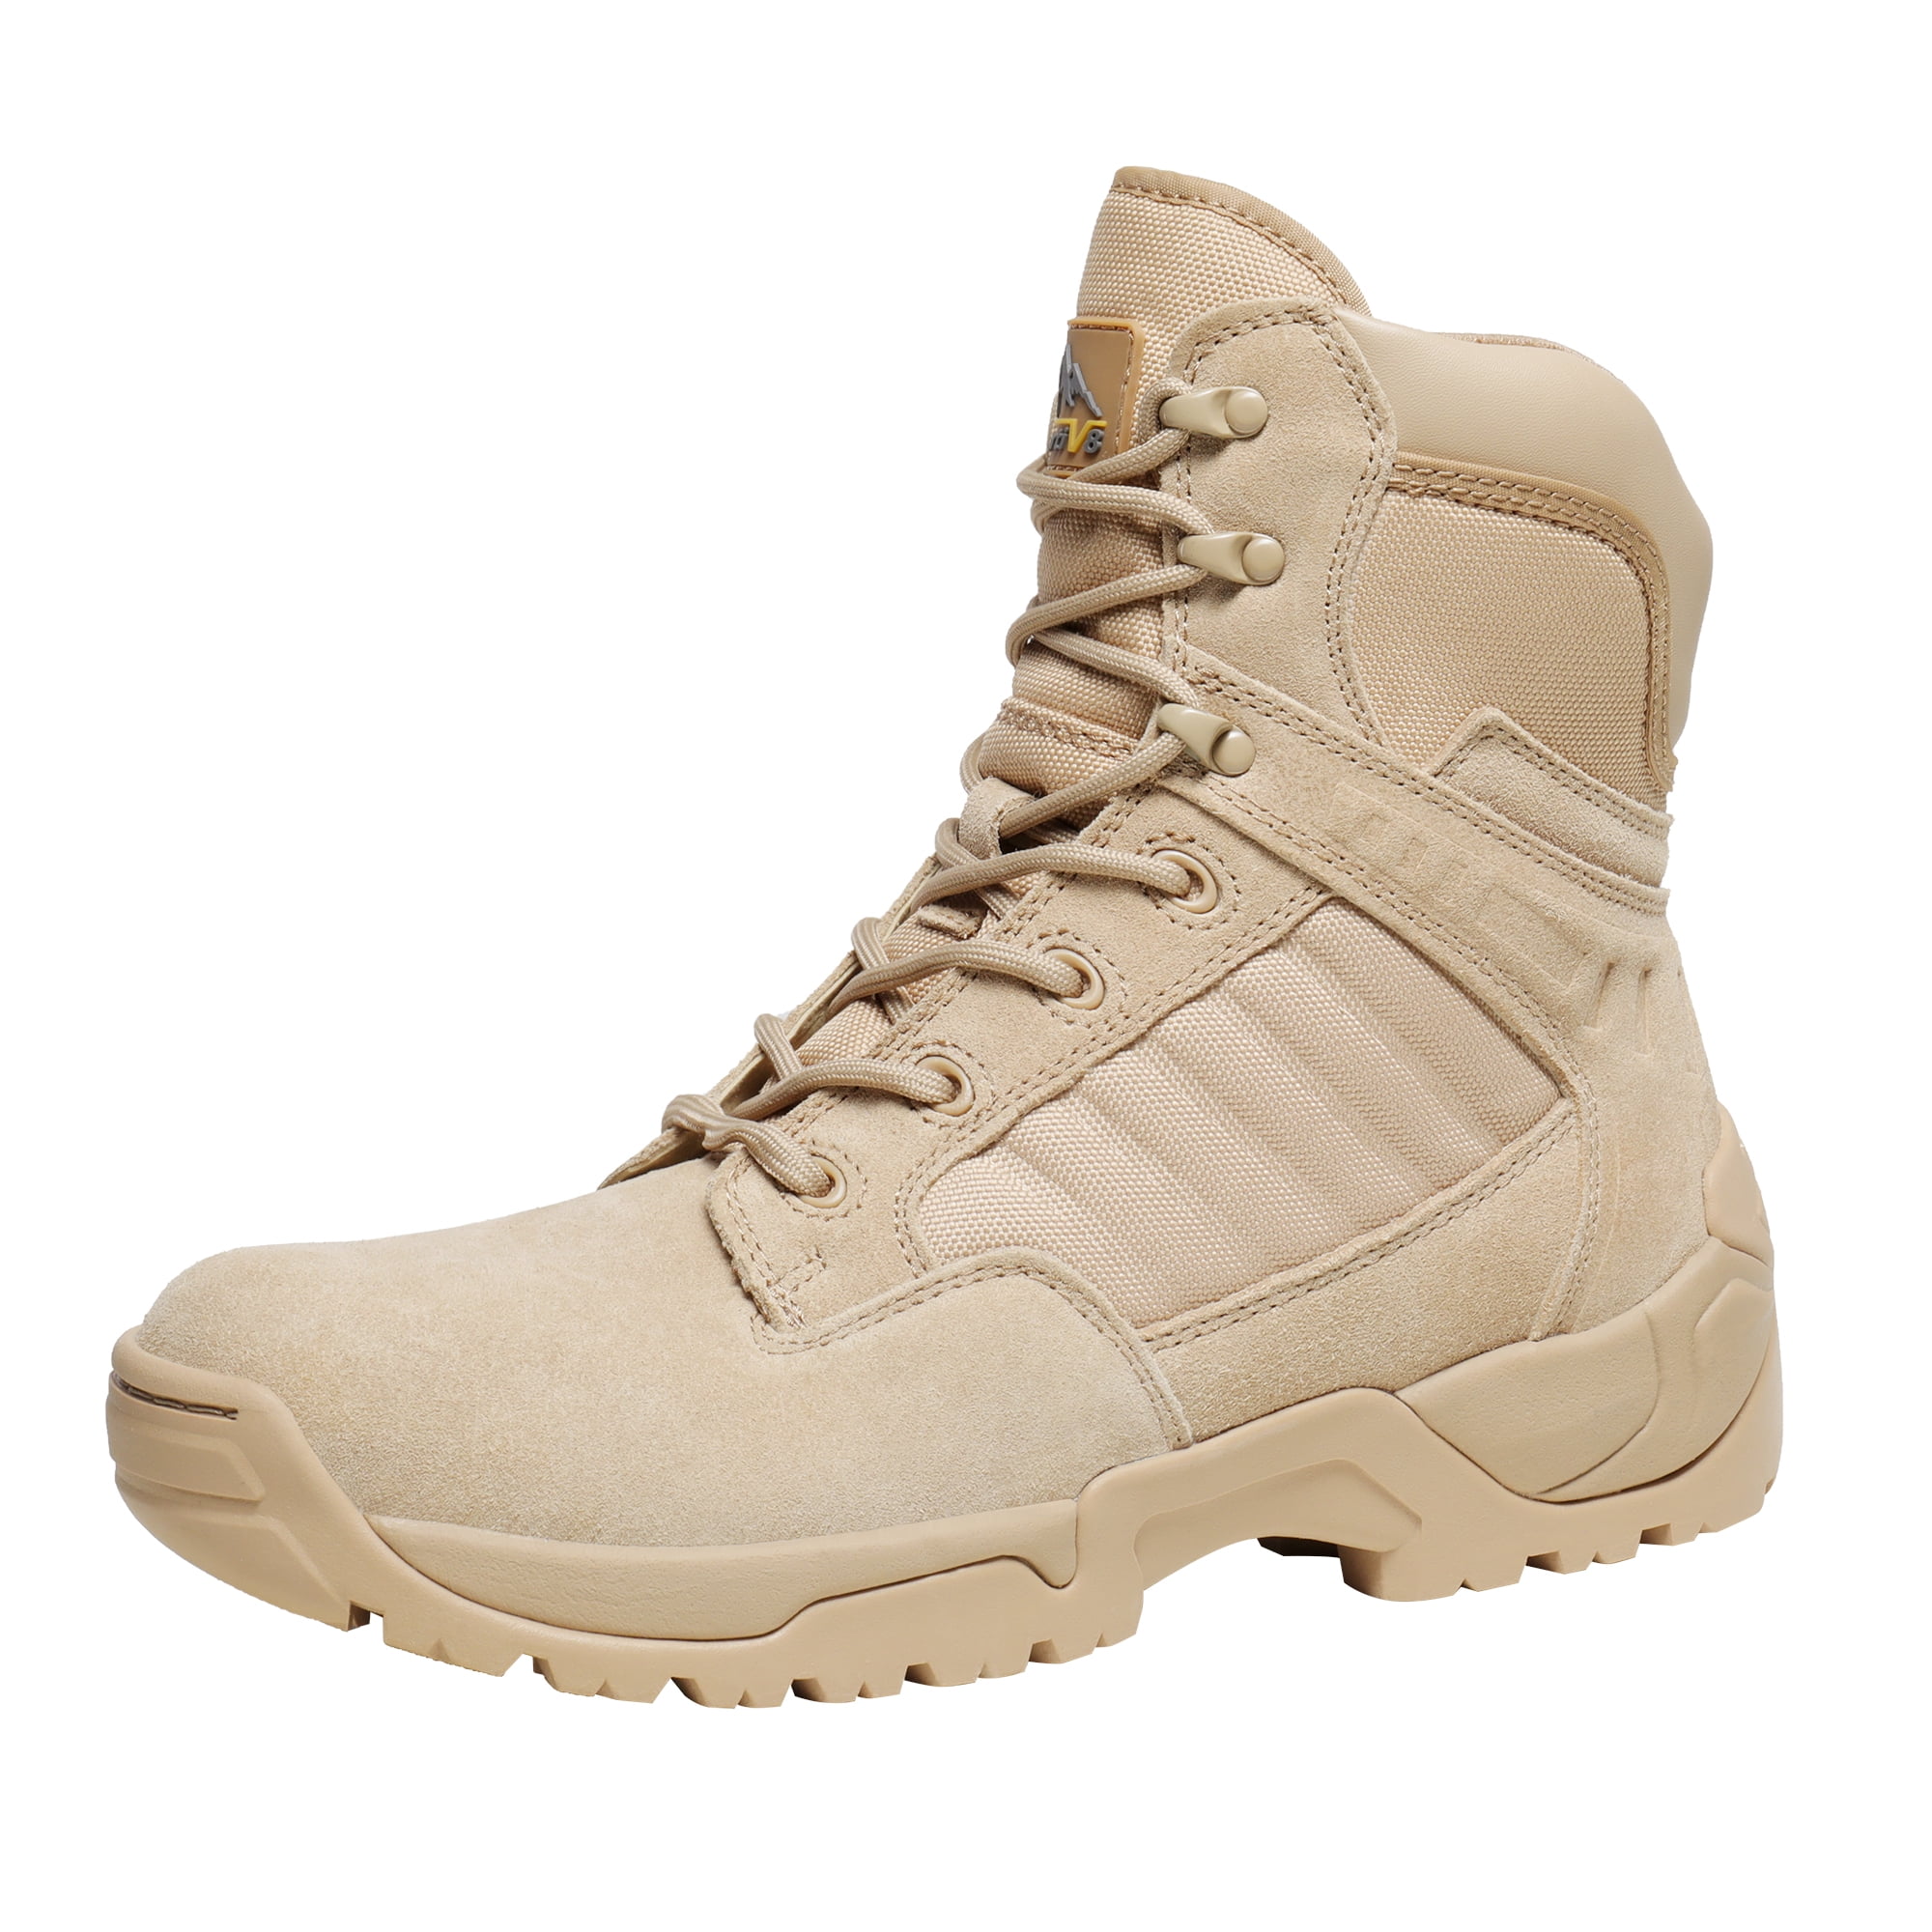 Mens High Top Ankle Work Boots Shoes Combat Military Desert Flats Fur Inside New